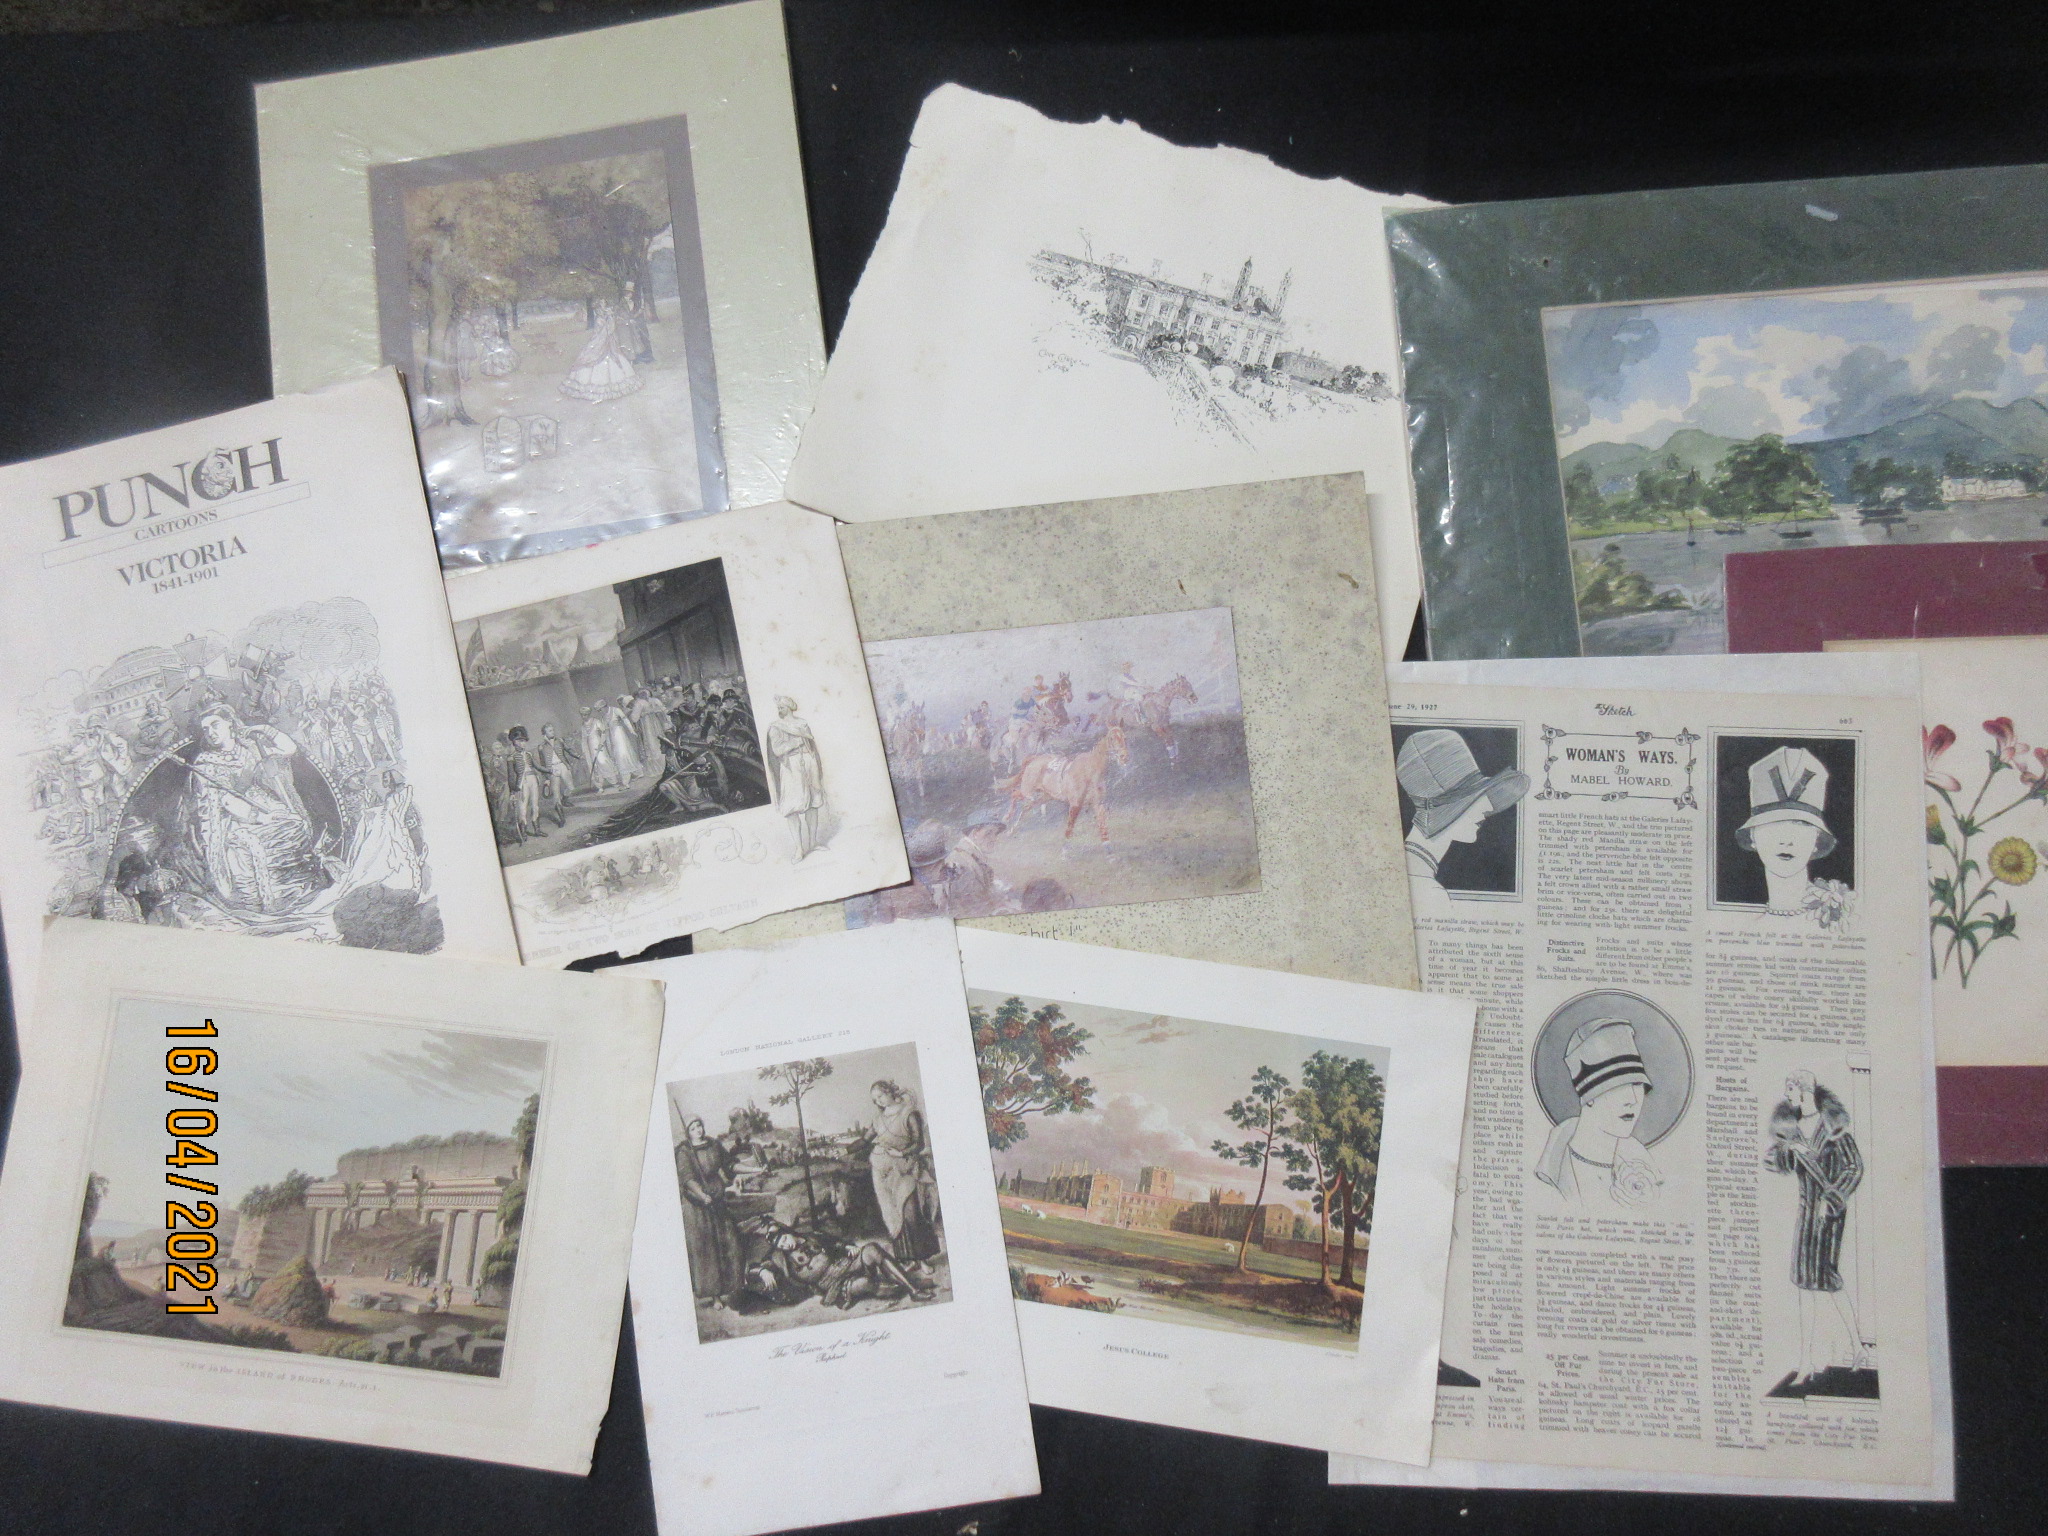 229A One box: 40 items including engravings/pictures including PUNCH cartoons - Victoria 1841-1901 +